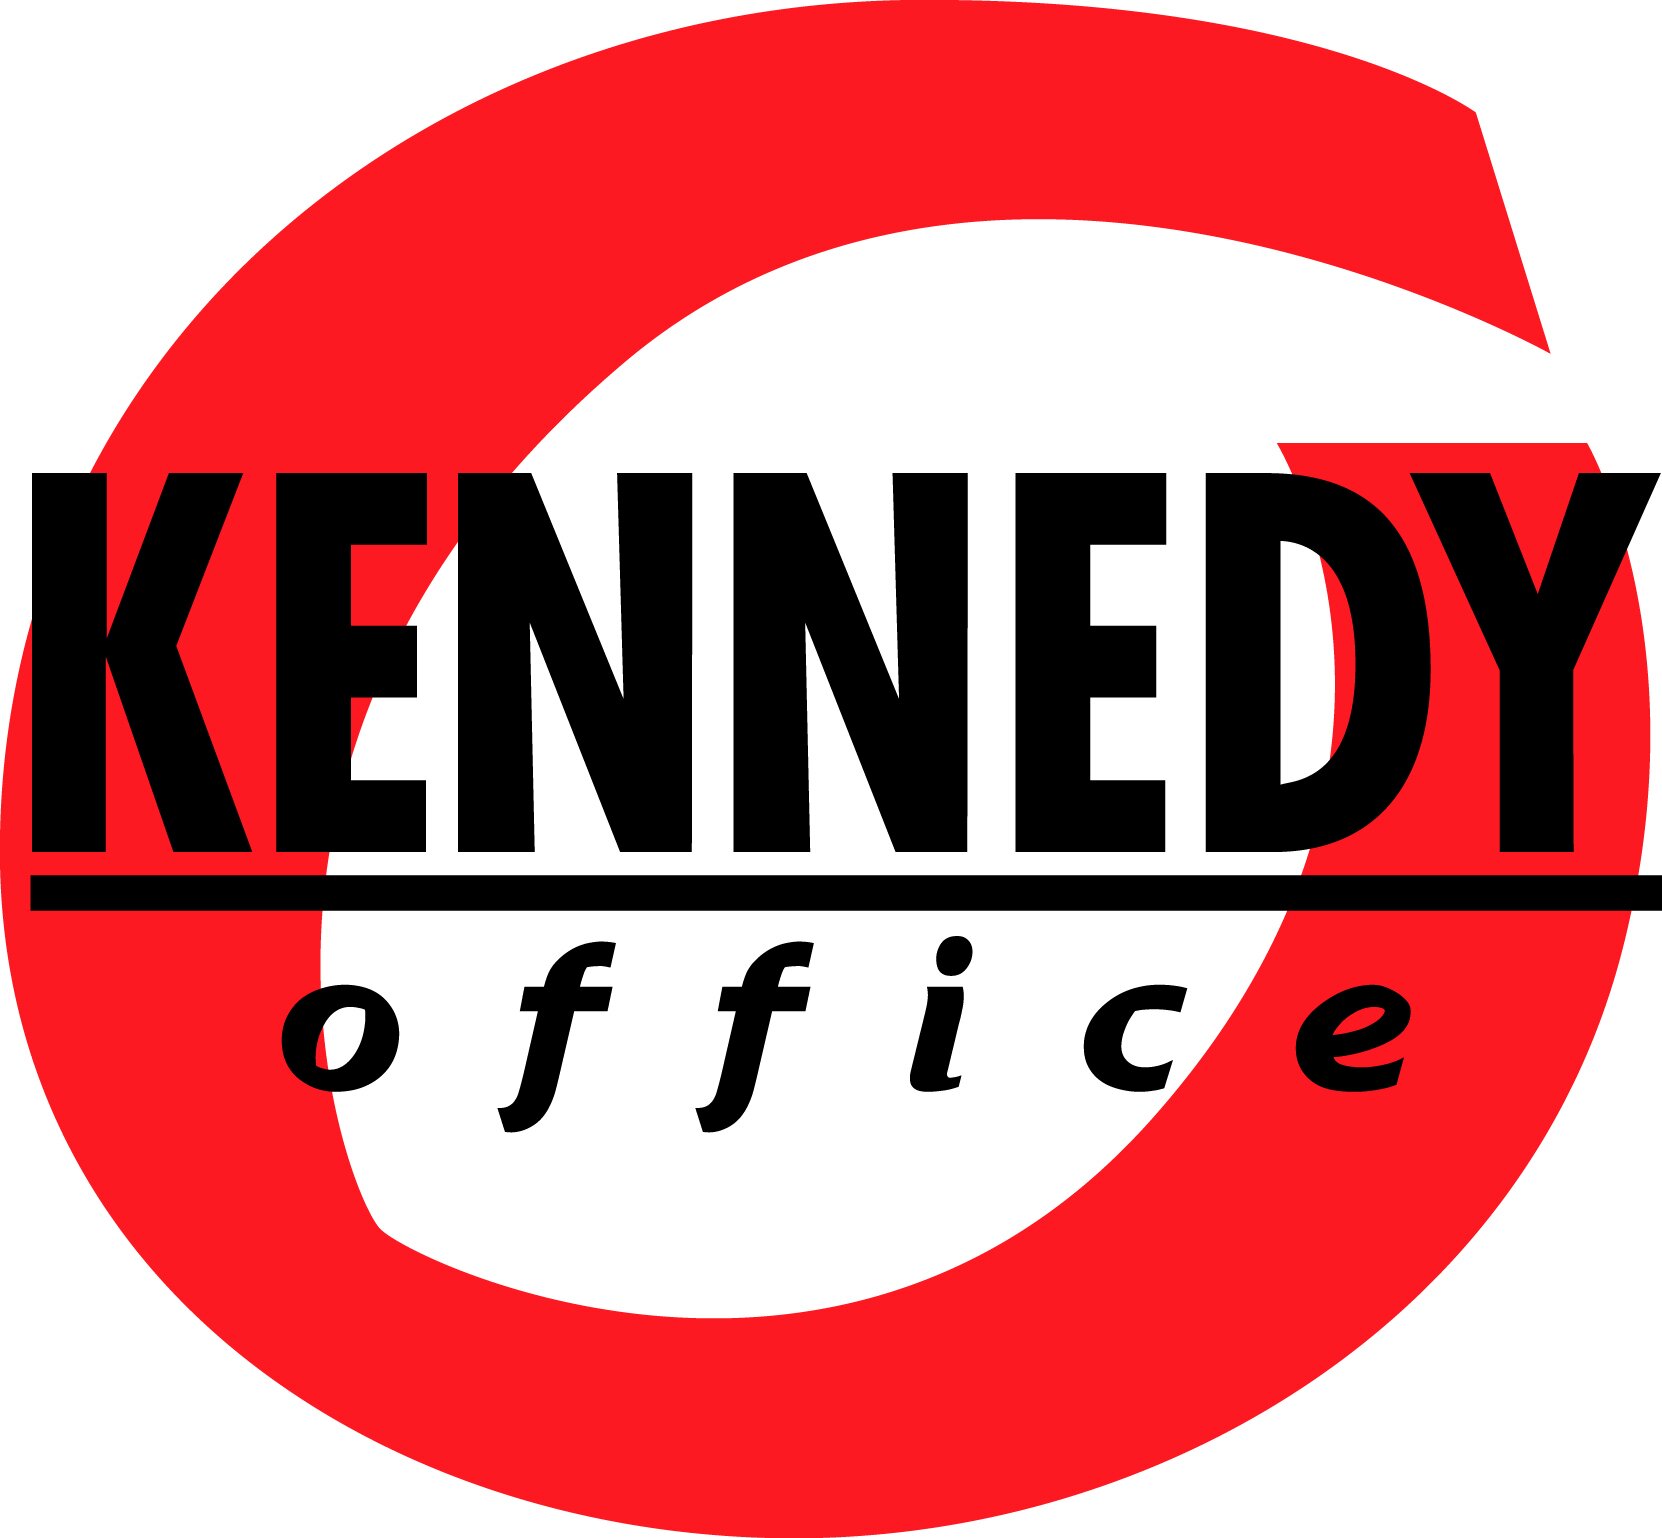 KennedyOffice, established in 1960, is the fastest growing independent office products and office furniture dealer in the Triangle and eastern North Carolina.